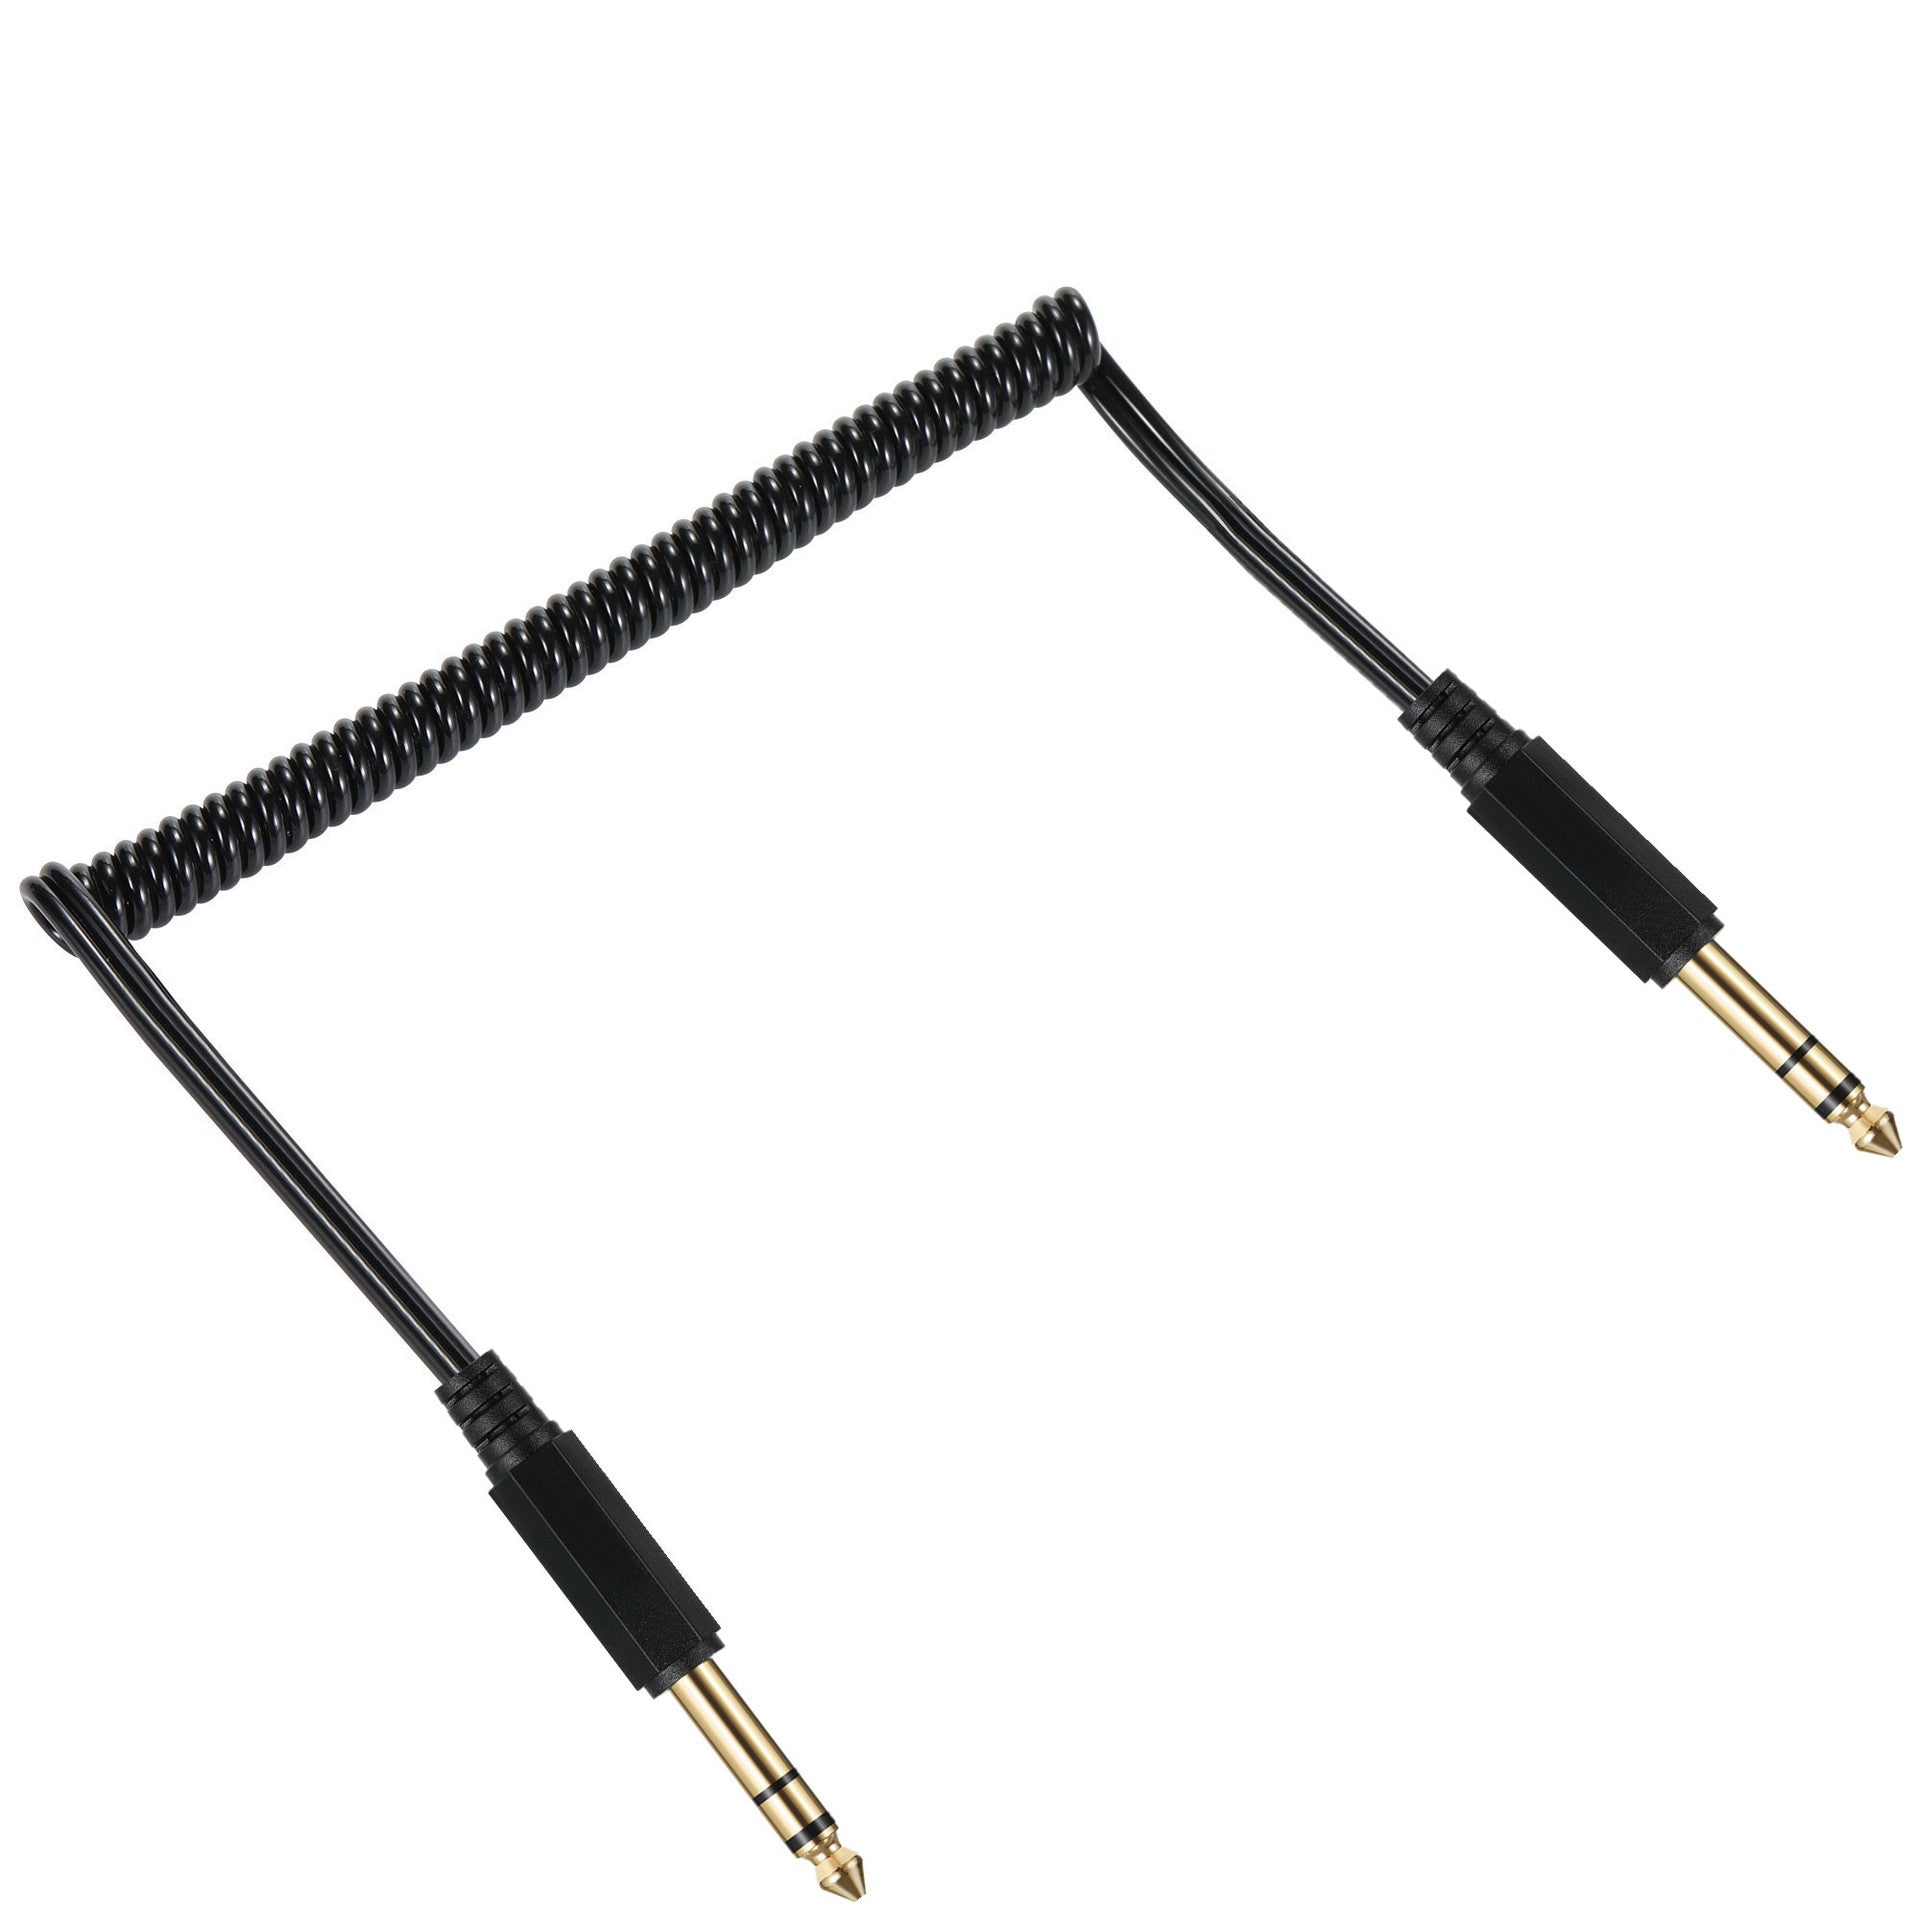 6.35mm 1/4 inch TRS Male to 6.35mm 1/4 inch TRS Male Stereo Professional Audio Cable